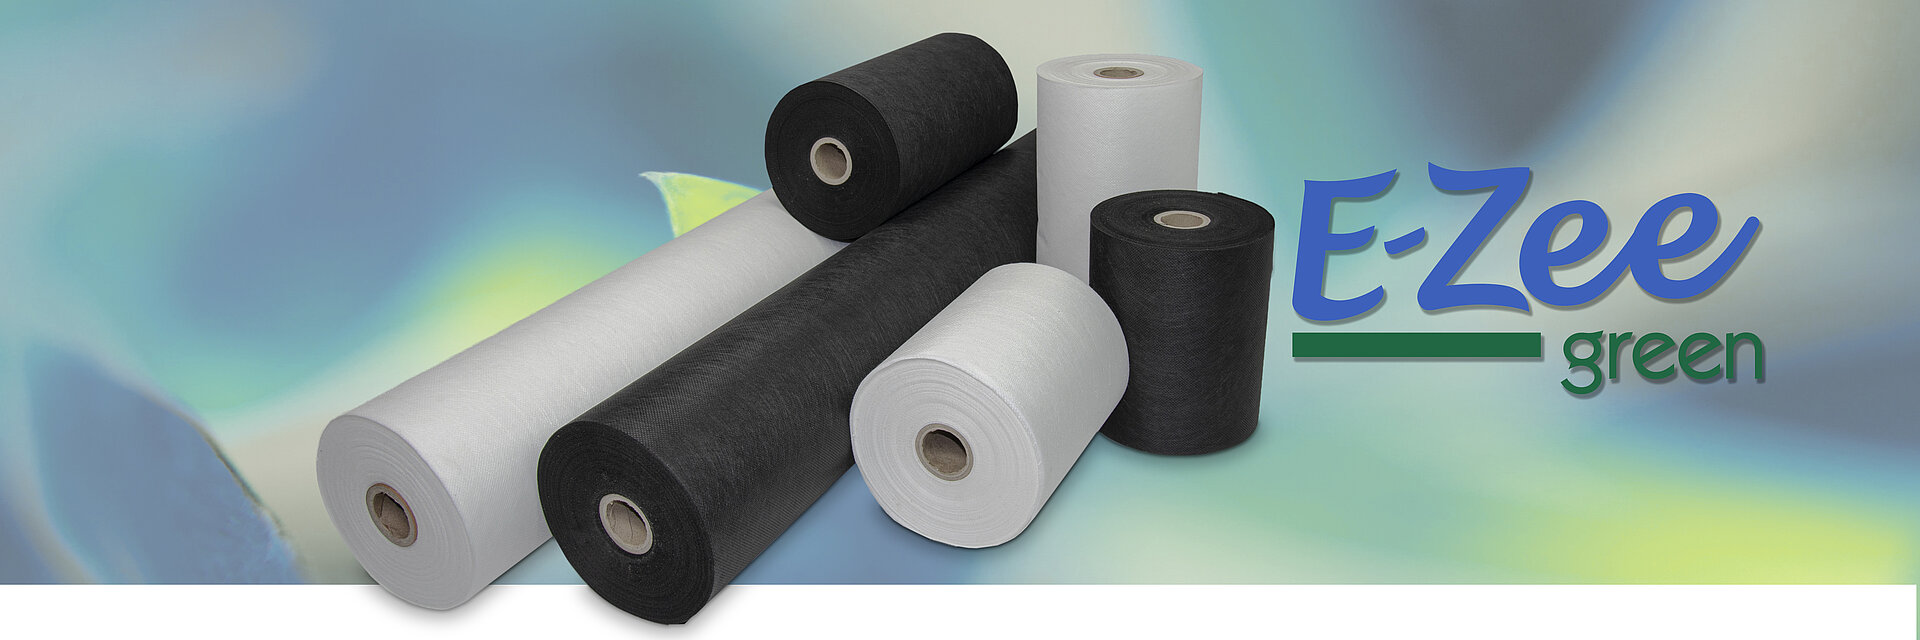 Sticky Nonwoven Embroidery Stabilizer Backing Water Soluble Paper